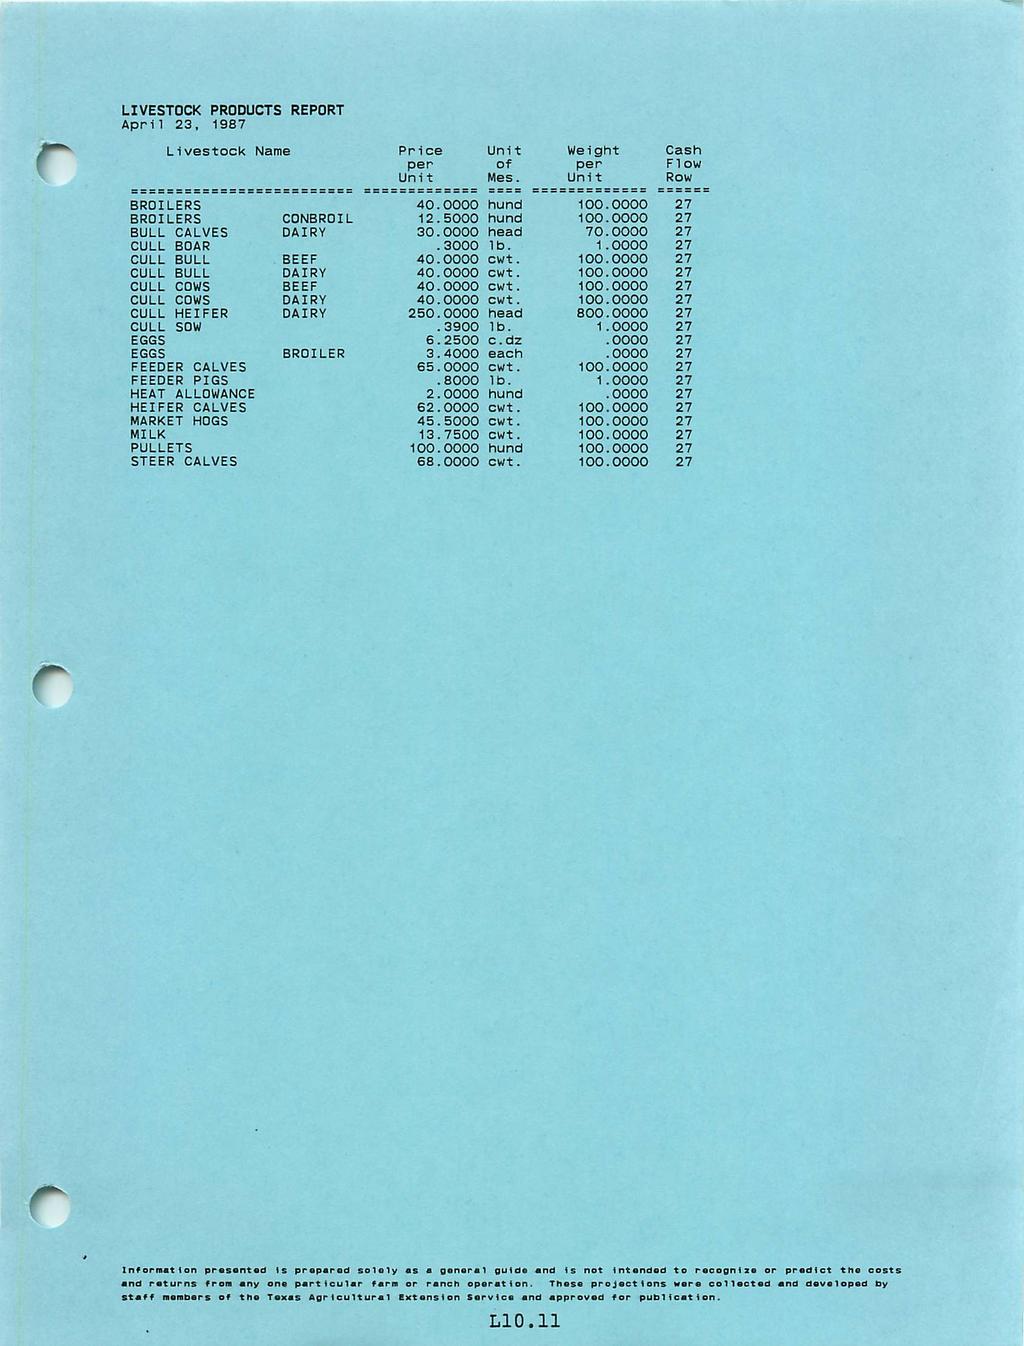 r Livestock LIVESTOCK PRODUCTS REPORT April 23, 1987 Na me Price Unit Weight Cash per of per FI ow Unit Mes. Unit Row BROILERS 40.OOOO hund 100 27 BROILERS CONBROIL 12.